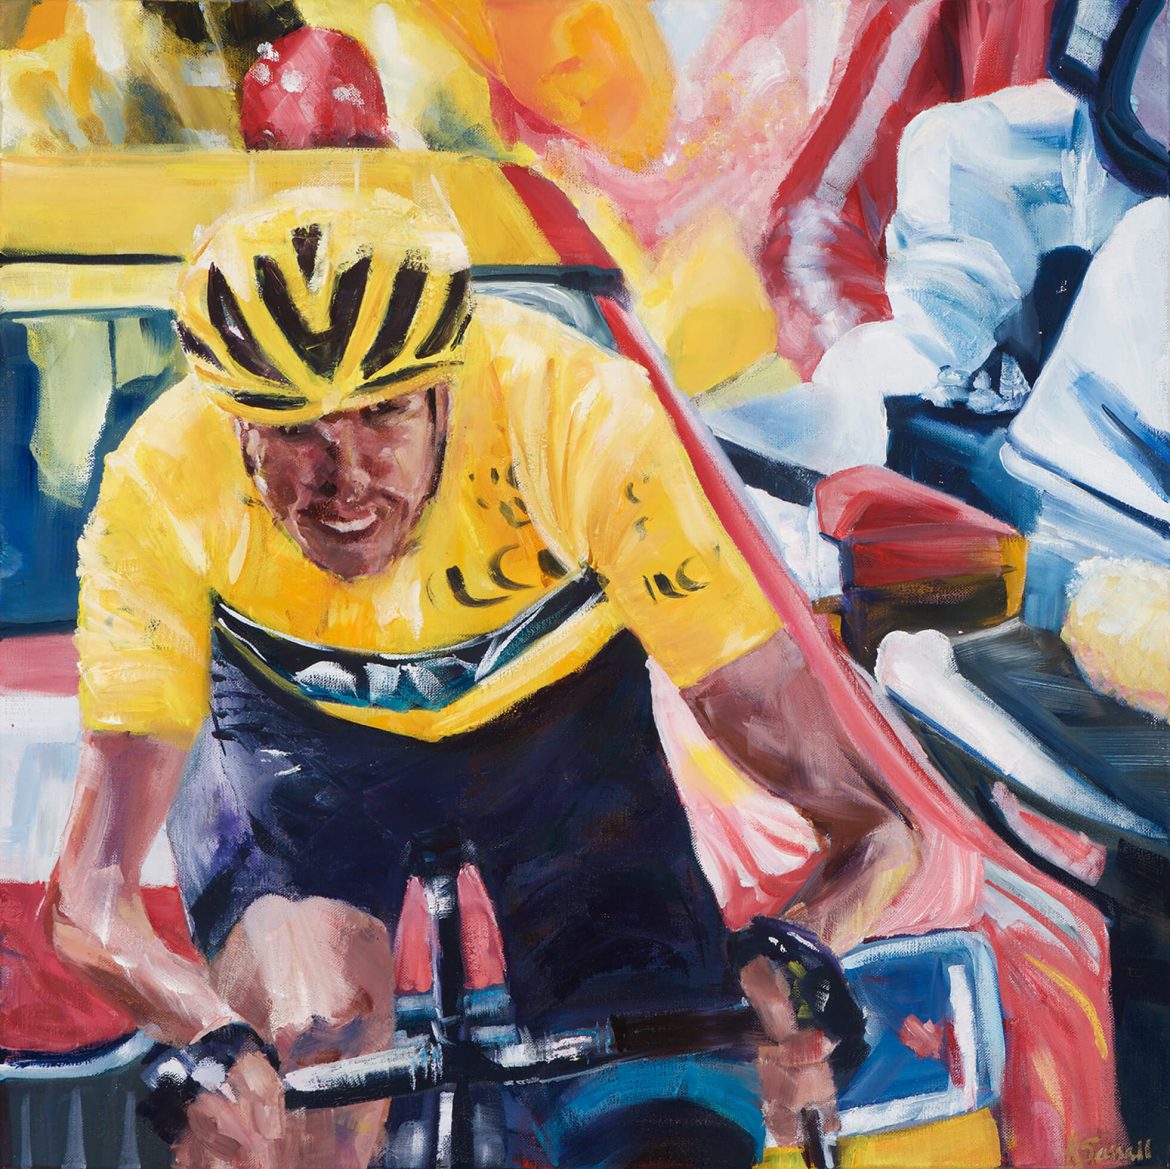 Chris froome cycling in front of course car captured in oil in a painting